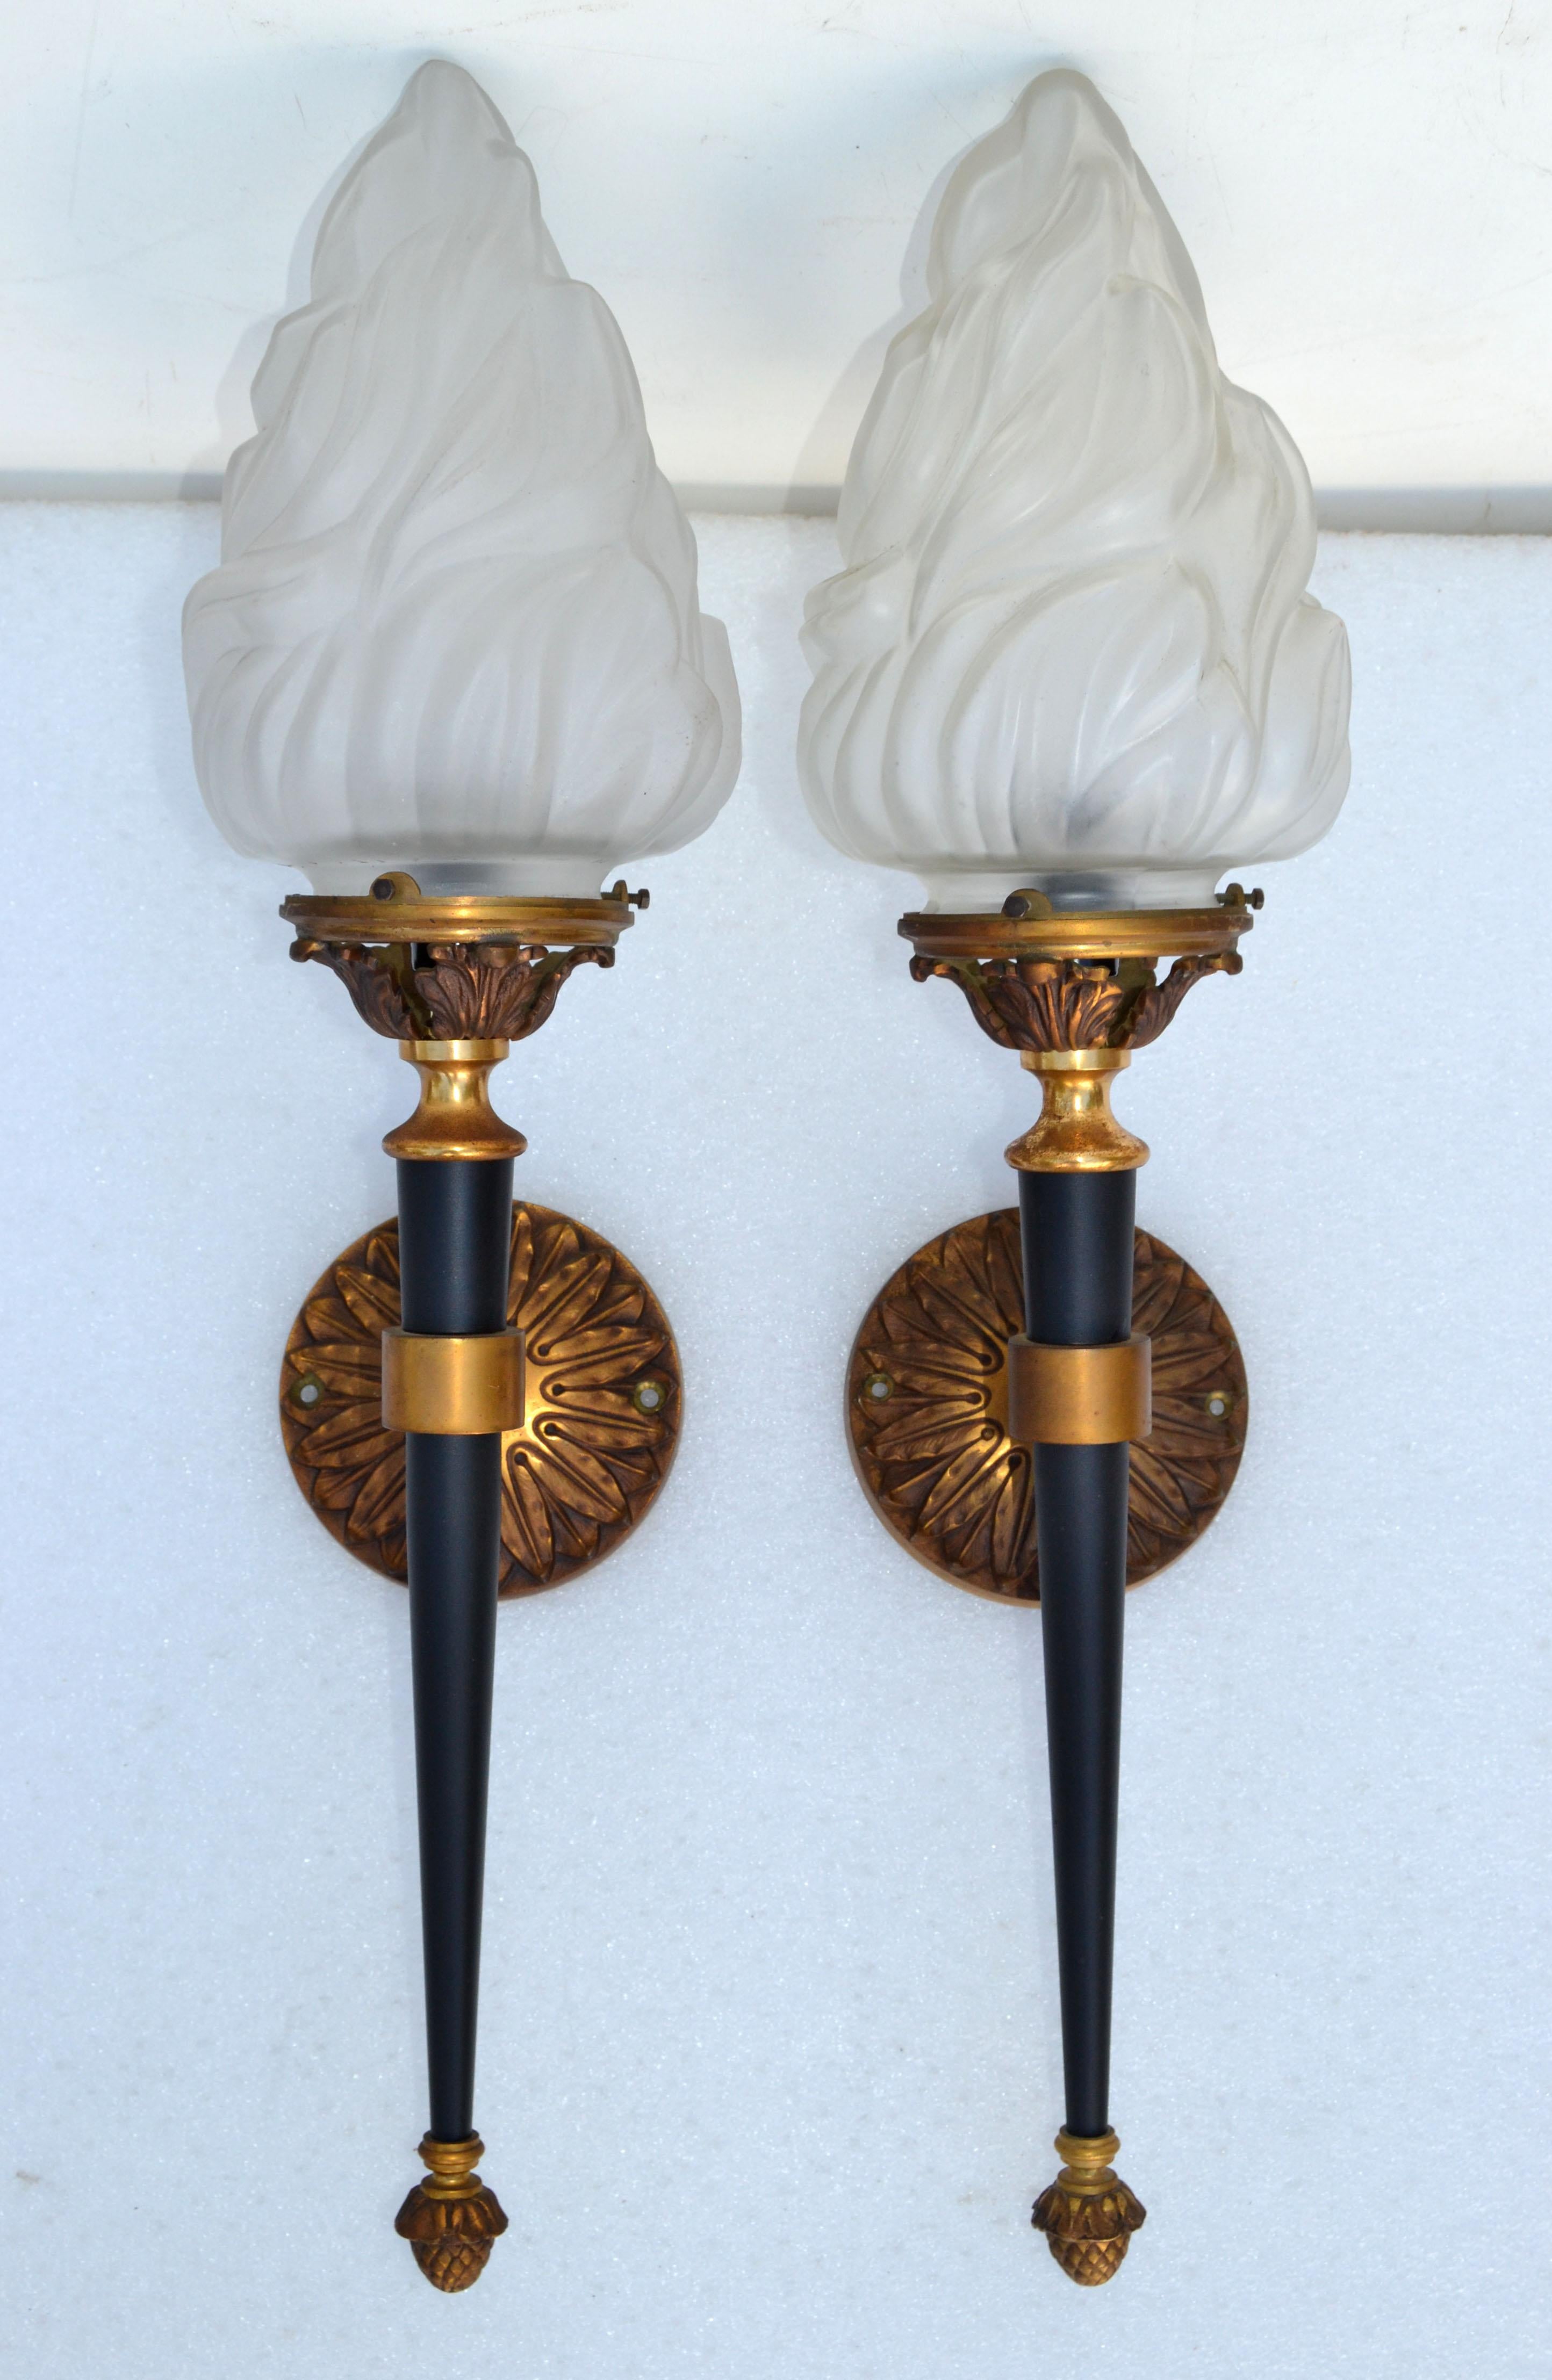 Pair of French Mid-Century Modern sconces, wall lights in solid bronze by Maison Jansen.
Featuring a torch in black finish with a blown glass flame shade. 
US wired and in working condition, takes one light bulb max. 60 watts.
Priced by pair, we